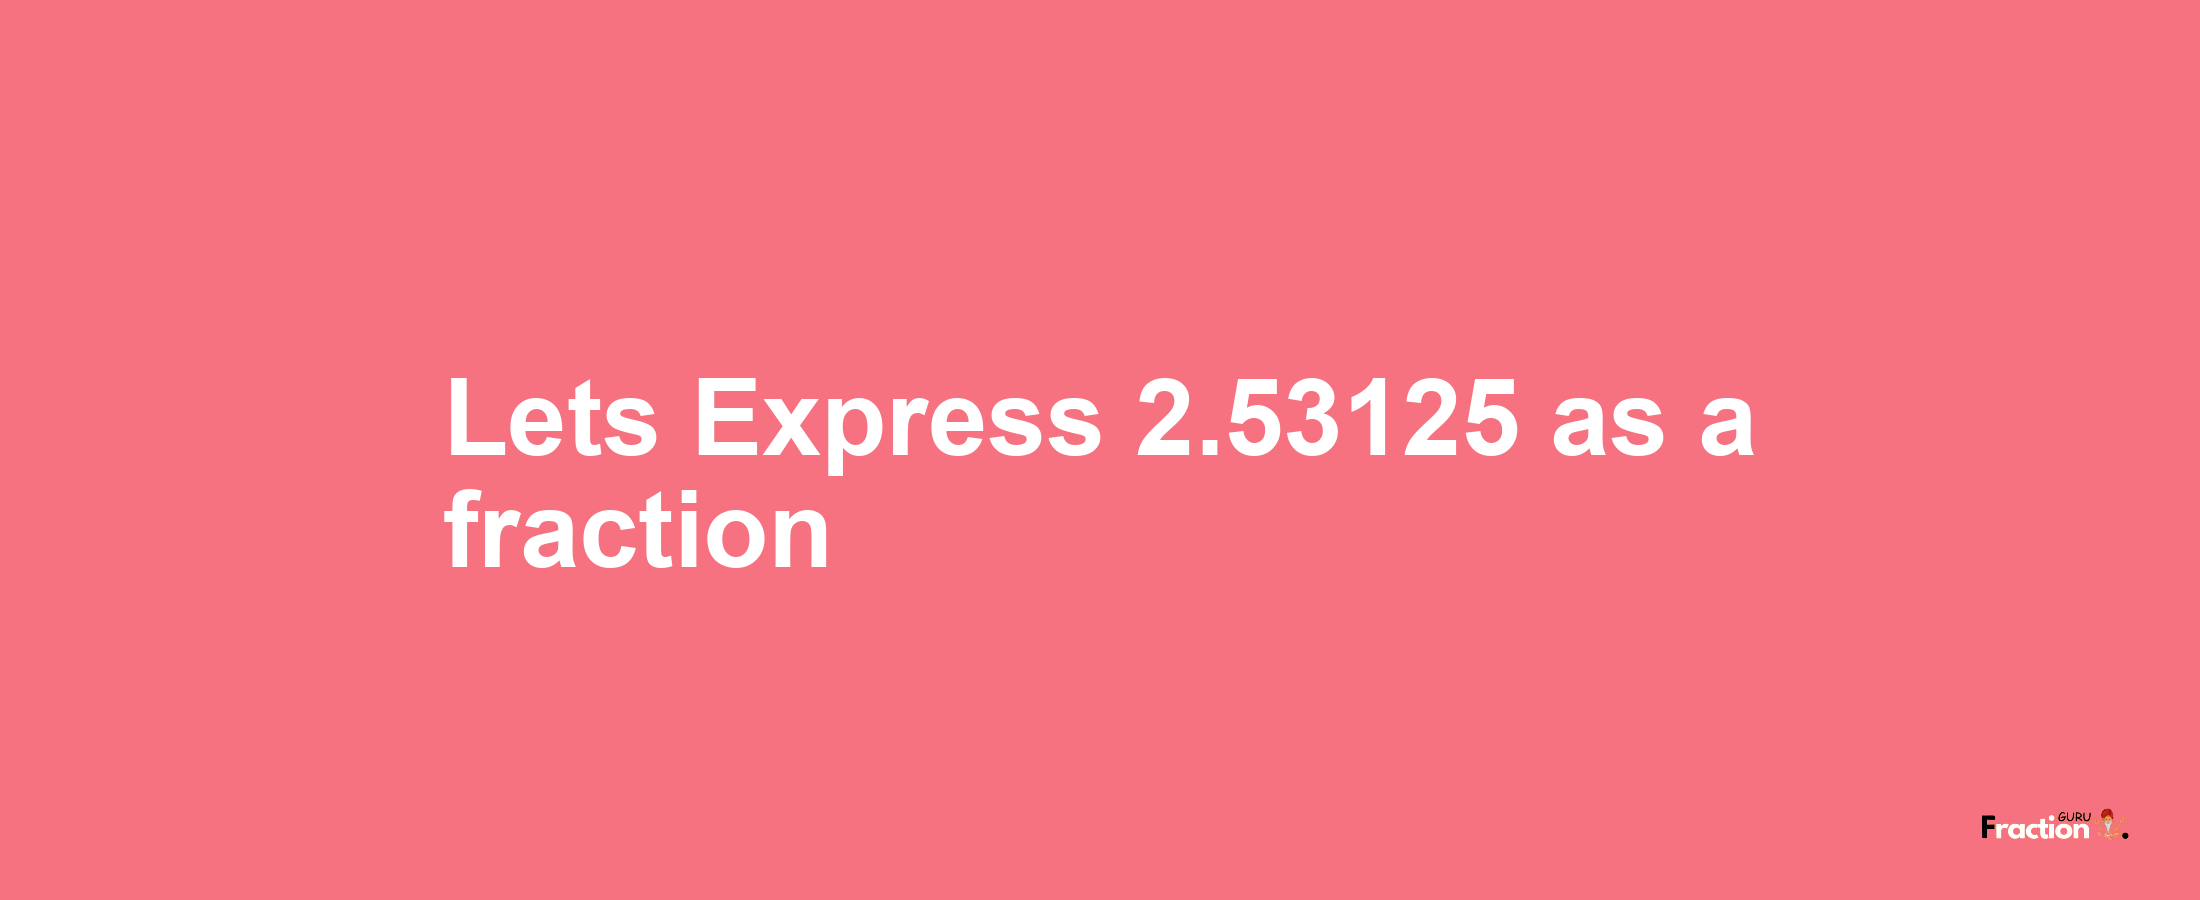 Lets Express 2.53125 as afraction